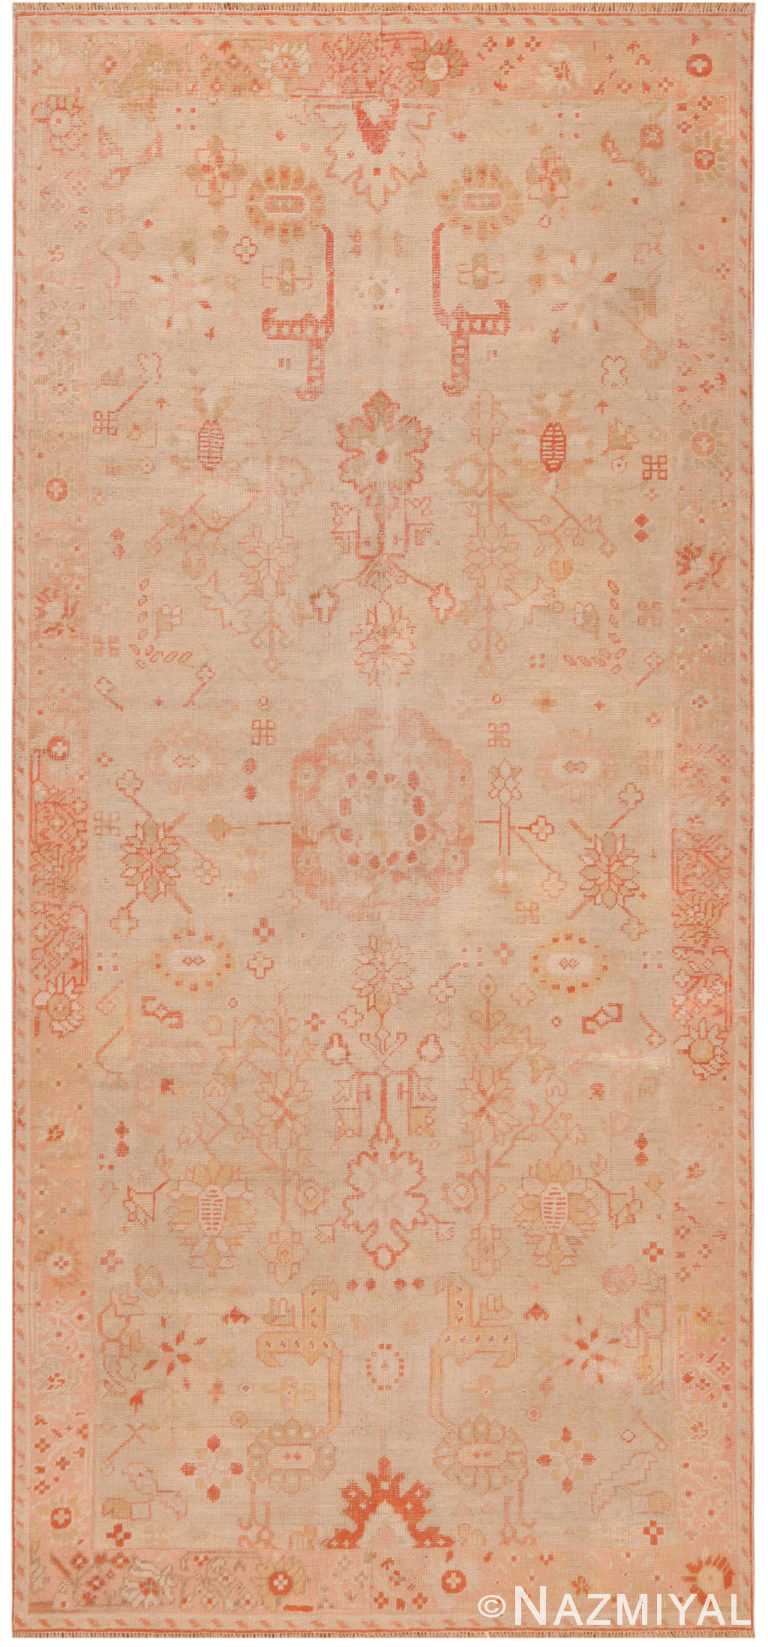 Antique Turkish Ghiordes Gallery Size Rug 71699 by Nazmiyal Antique Rugs